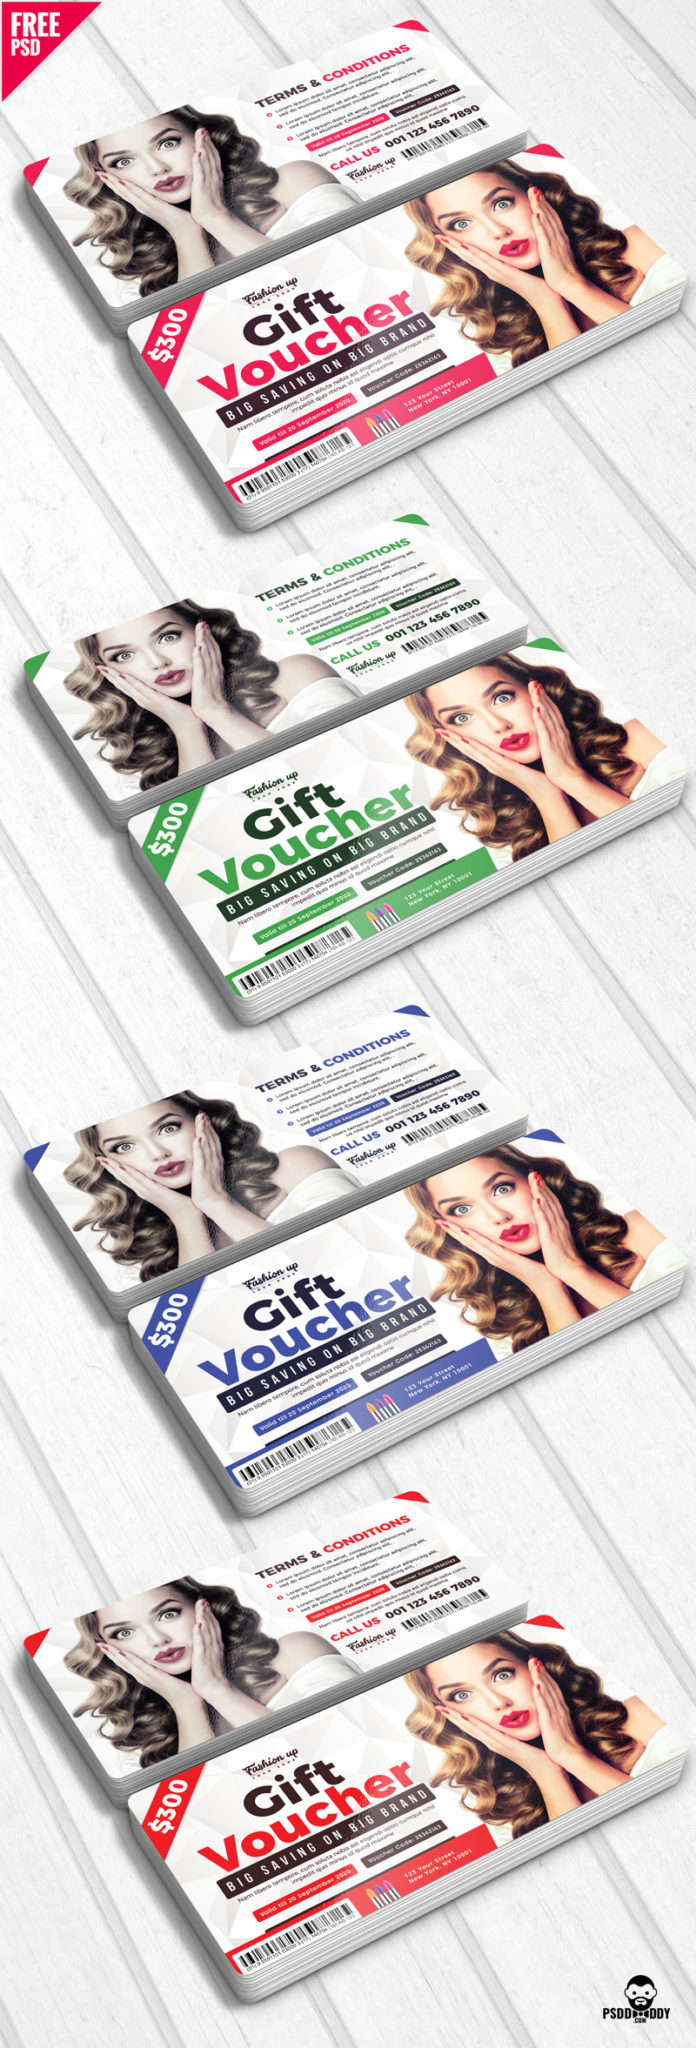 amazon gift voucher, business gift certificate template, card mockup, concert ticket template, coupon design, create a voucher, create your own gift card, custom gift cards, custom gift cards for business, custom gift certificates, design a gift voucher, design mockup, design toscano, design your own gift card, discount coupon mockup, e gift cards, free gift certificate template free mockup, free mockup psd, free mockup templates, gift, gift card, gift card design, gift card design online, gift card design template, gift card images, gift card maker, gift card template, gift certificate ideas, gift ideas, gift voucher design, gift voucher design ideas, gift voucher mockup, gift voucher printing, graphic design mockups, make your own coupon, make your own gift card, make your own gift voucher, mock up, mockup, mockup design, mockup free, mockup psd, mockup psd free, mockup templates online gift vouchers, pandora gift vouchers, photoshop mockup, pizza coupons, postcard mockup, print coupons, psd mockups, raffle ticket template, ticket template, voucher design, voucher format, voucher template, voucher template free, psd mockup free download, fashion gift voucher free psd, psd mockups, psd daddy, psddaddy, download psd, downloadpsd, creativepsd, creative psd, psd freebies, psd download, freebies, free download psd, 